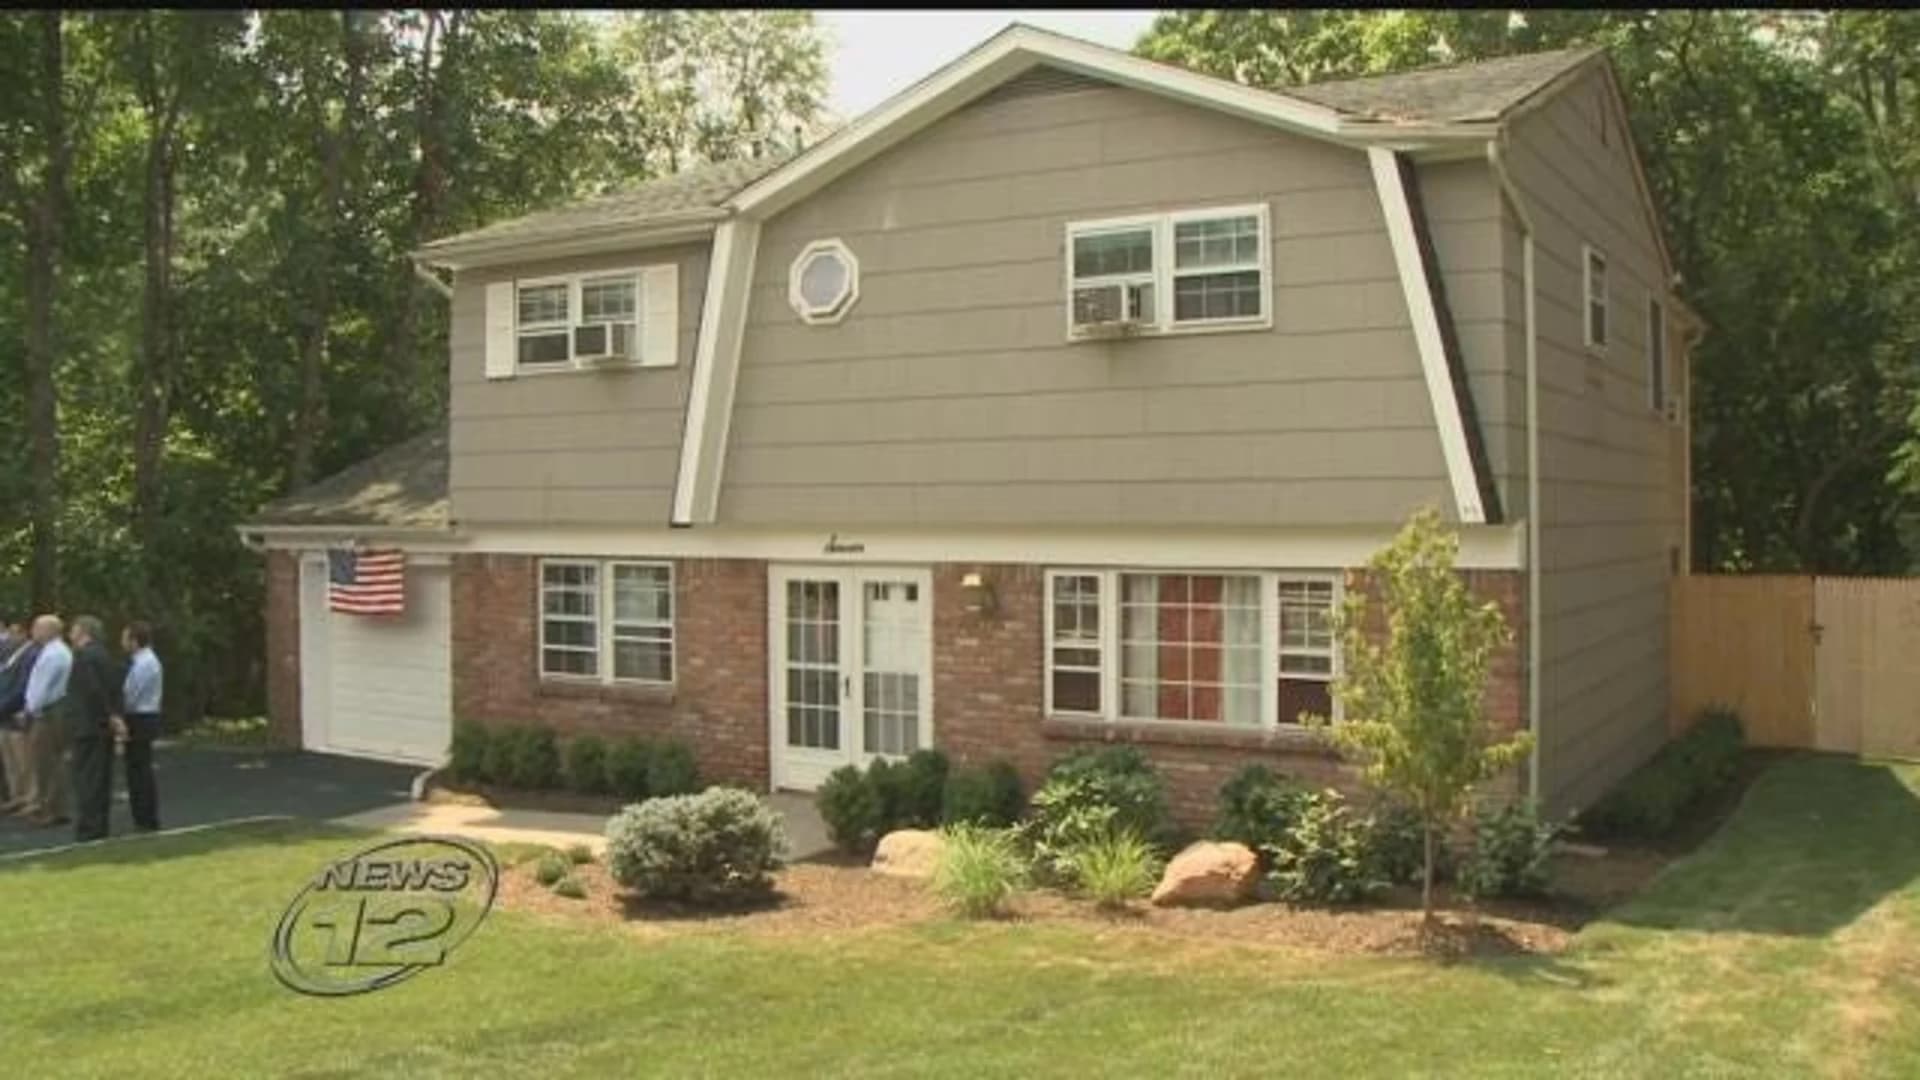 Nanuet woman gets 'George to the Rescue' home renovations